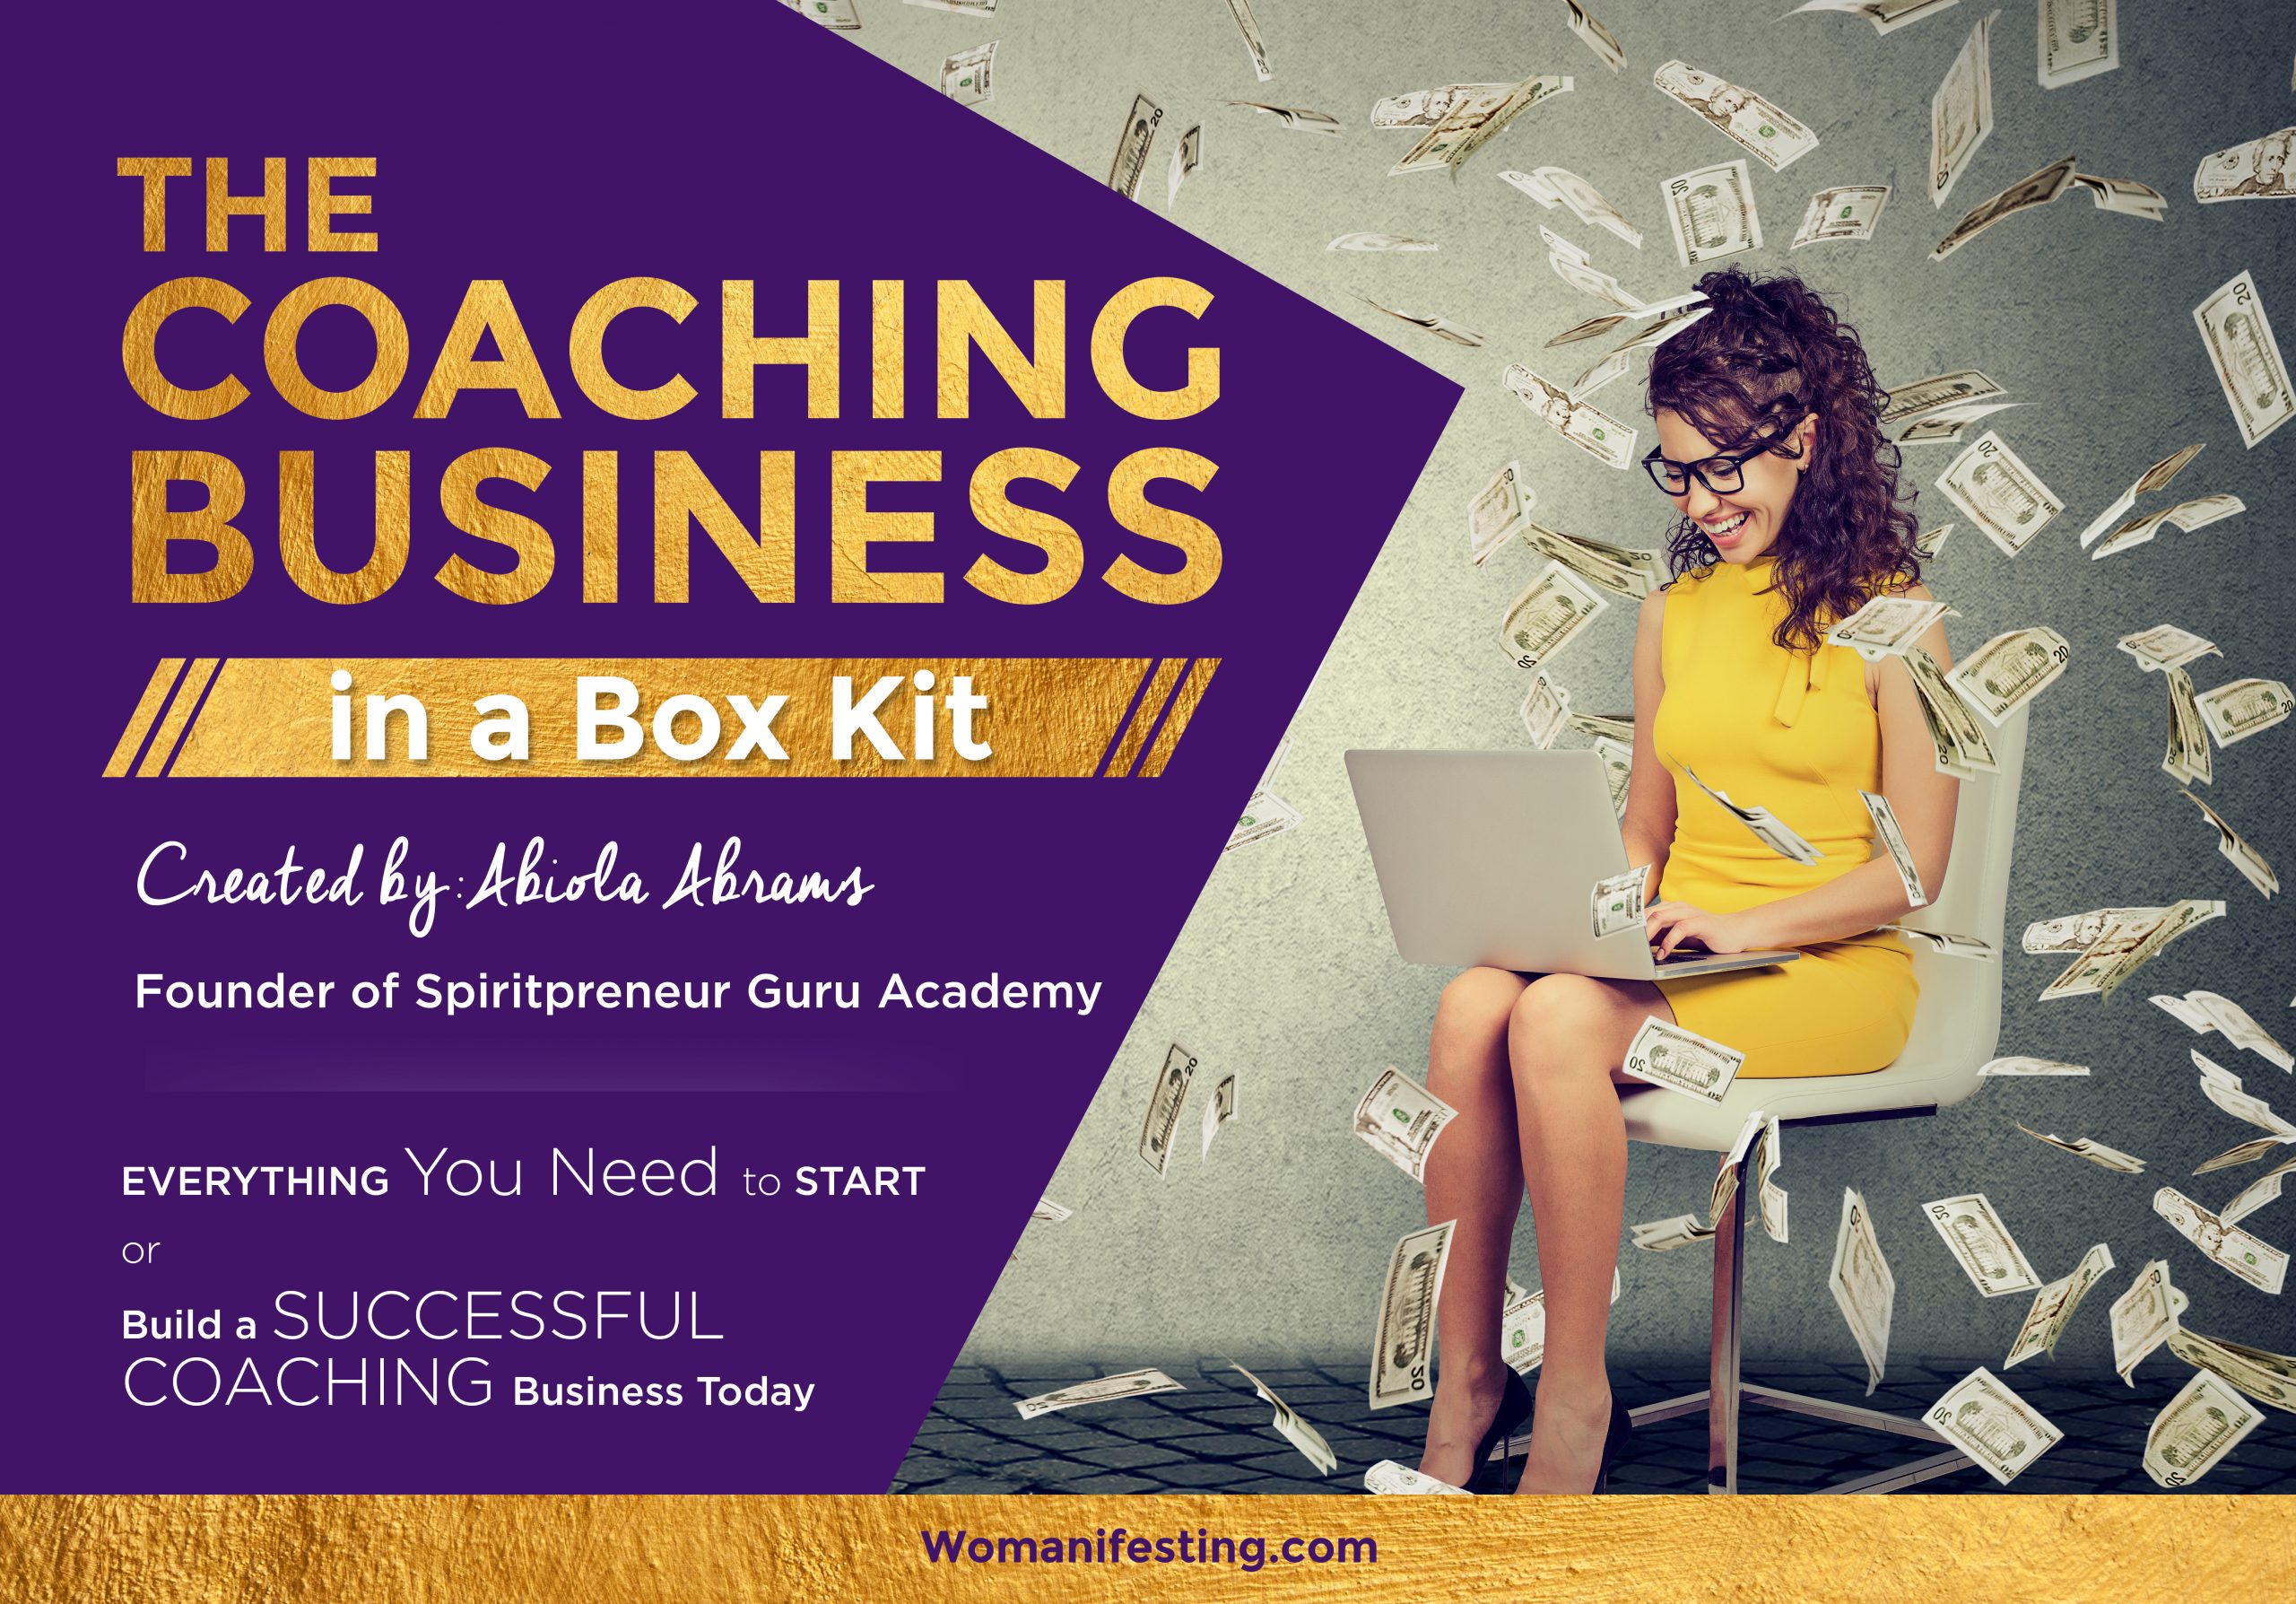 Life Coaching Business in a Box Kit